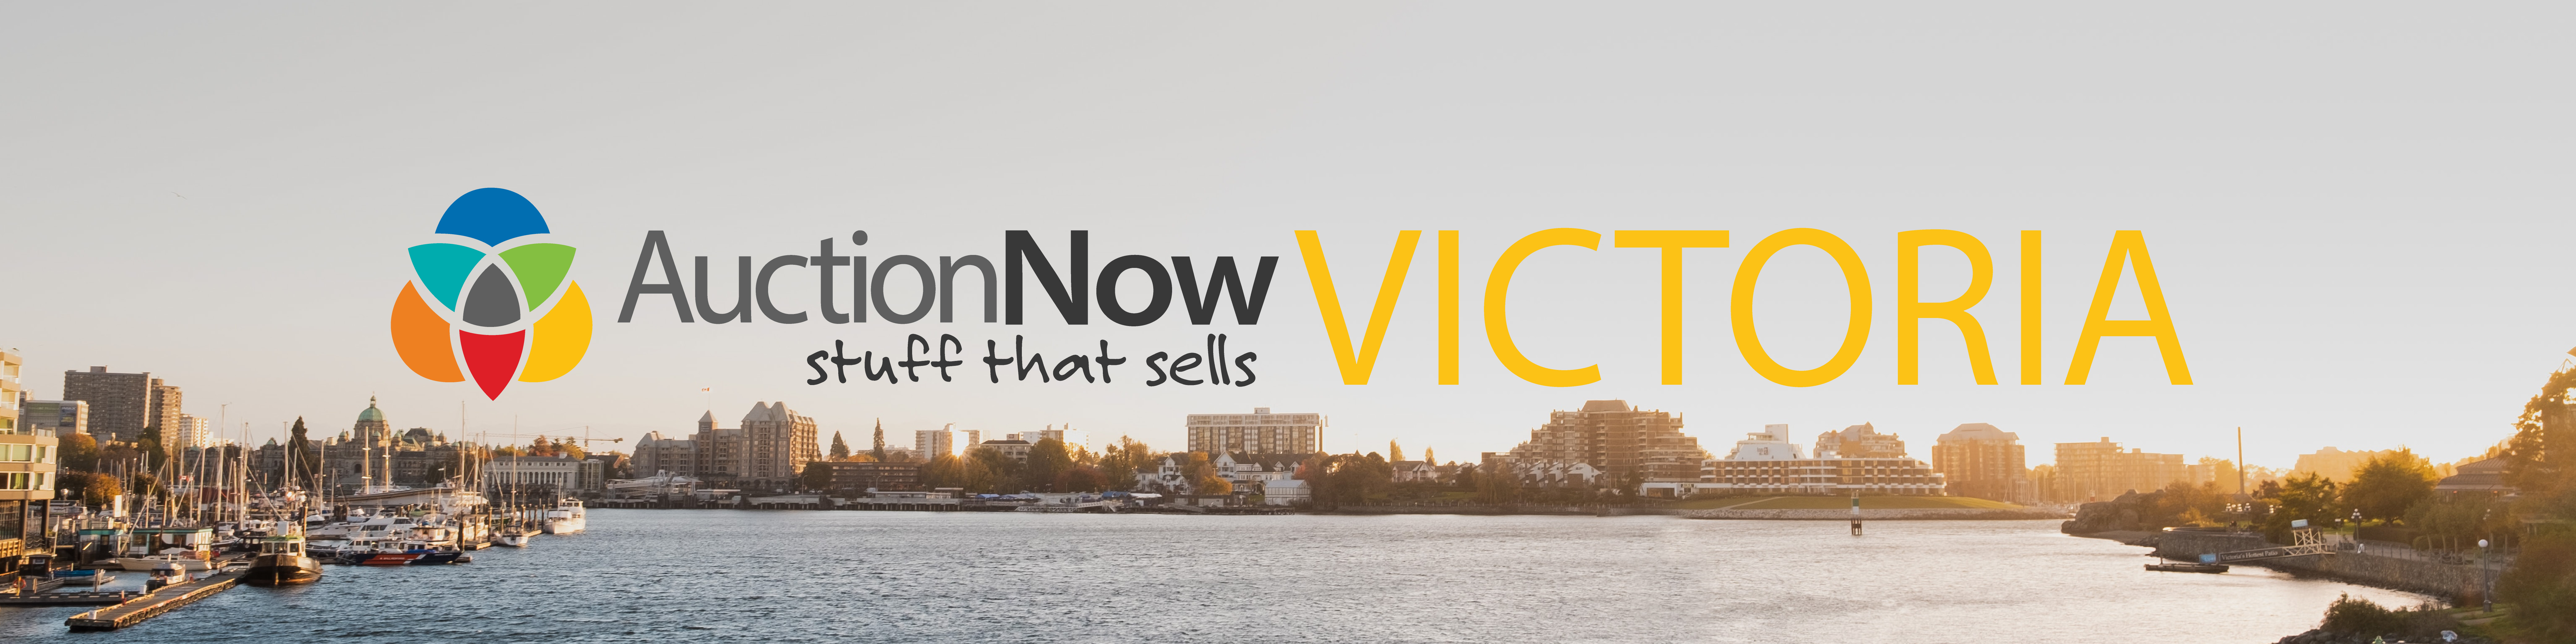 travel auctions powered sites victoria